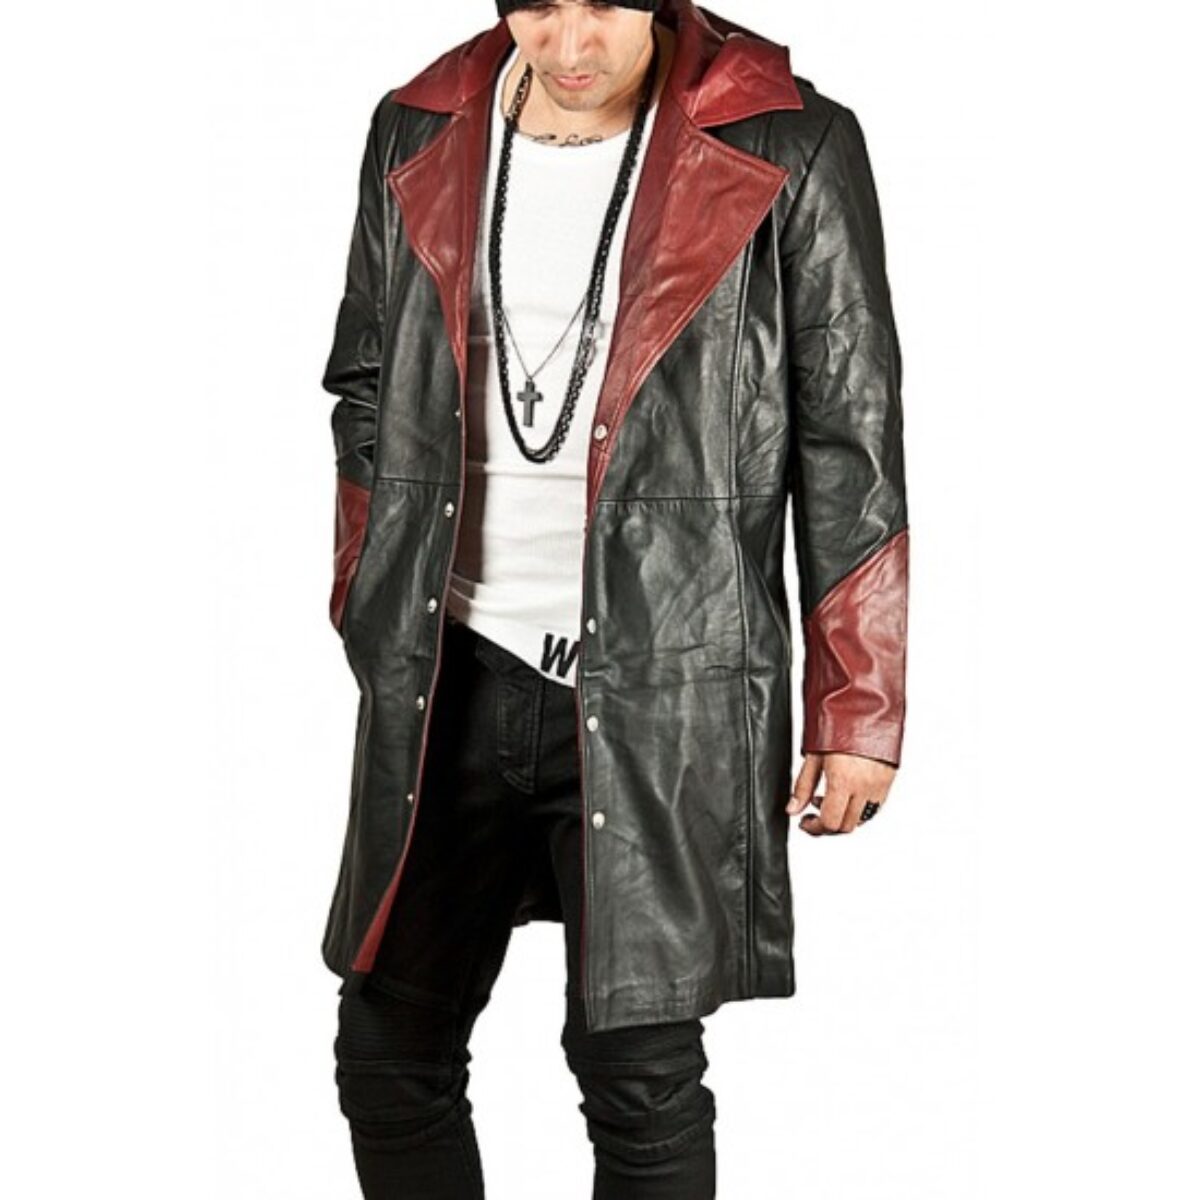 NEW MEN'S DEVIL HALLOWEEN COSTUME LEATHER LONG CRY MAY DANTE LEATHER HOODIE COAT 